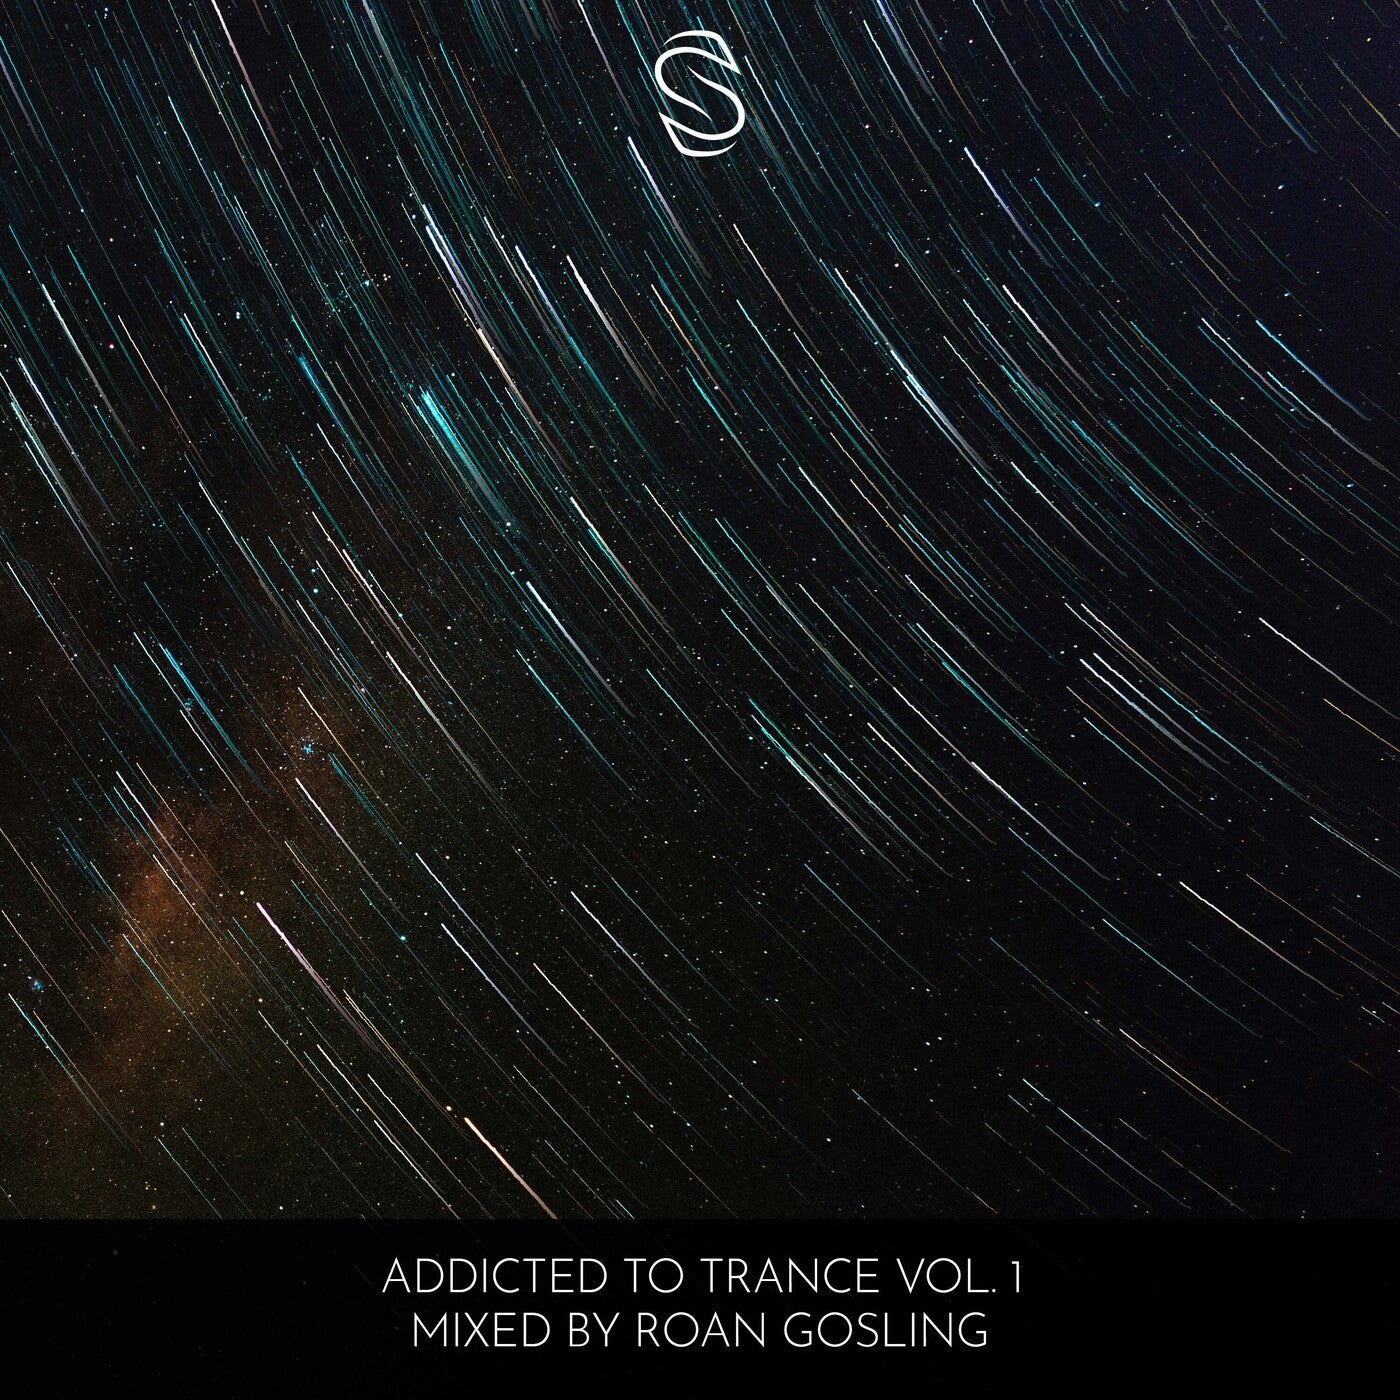 Addicted to Trance Vol. 1 - Mixed by Roan Gosling